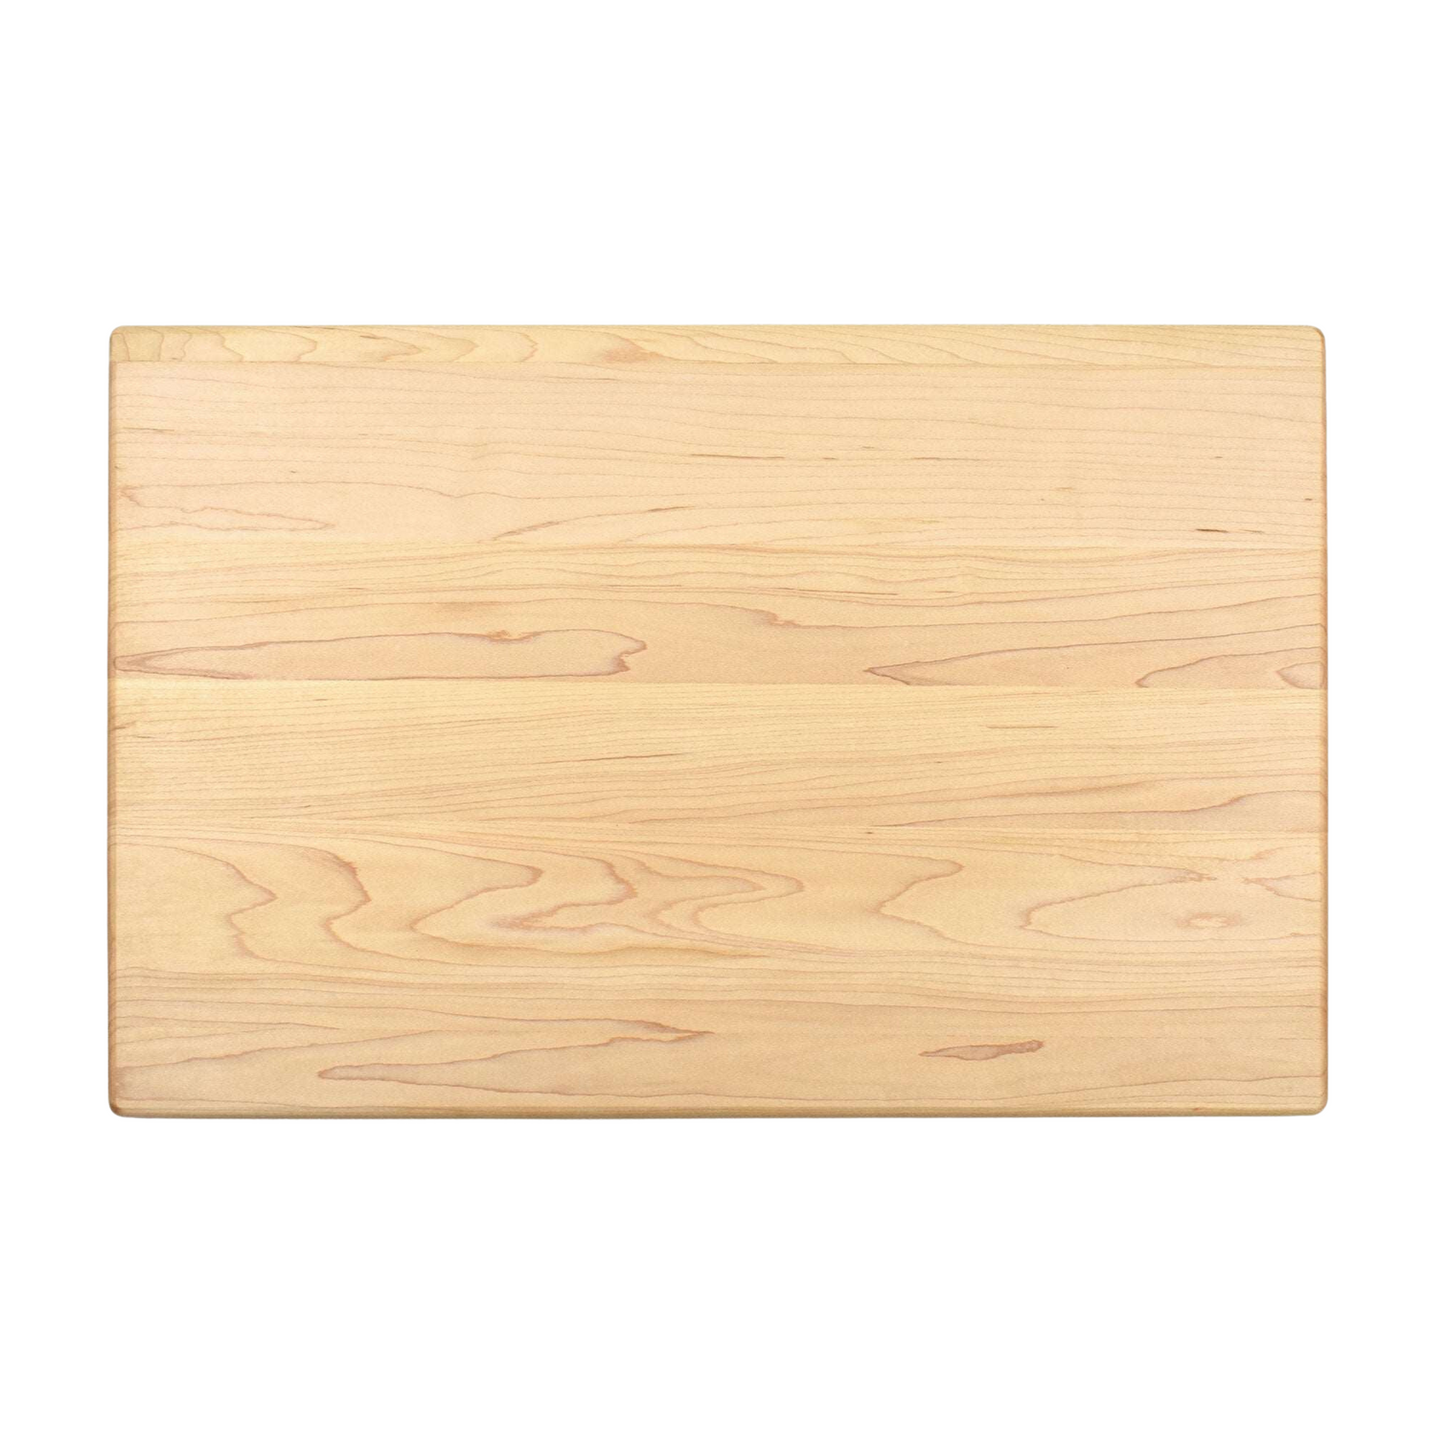 Candy Countdown Days Till Halloween Cutting Board - Premium Cutting Boards from Hipster Lasers - Just $90! Shop now at Hipsterlasers